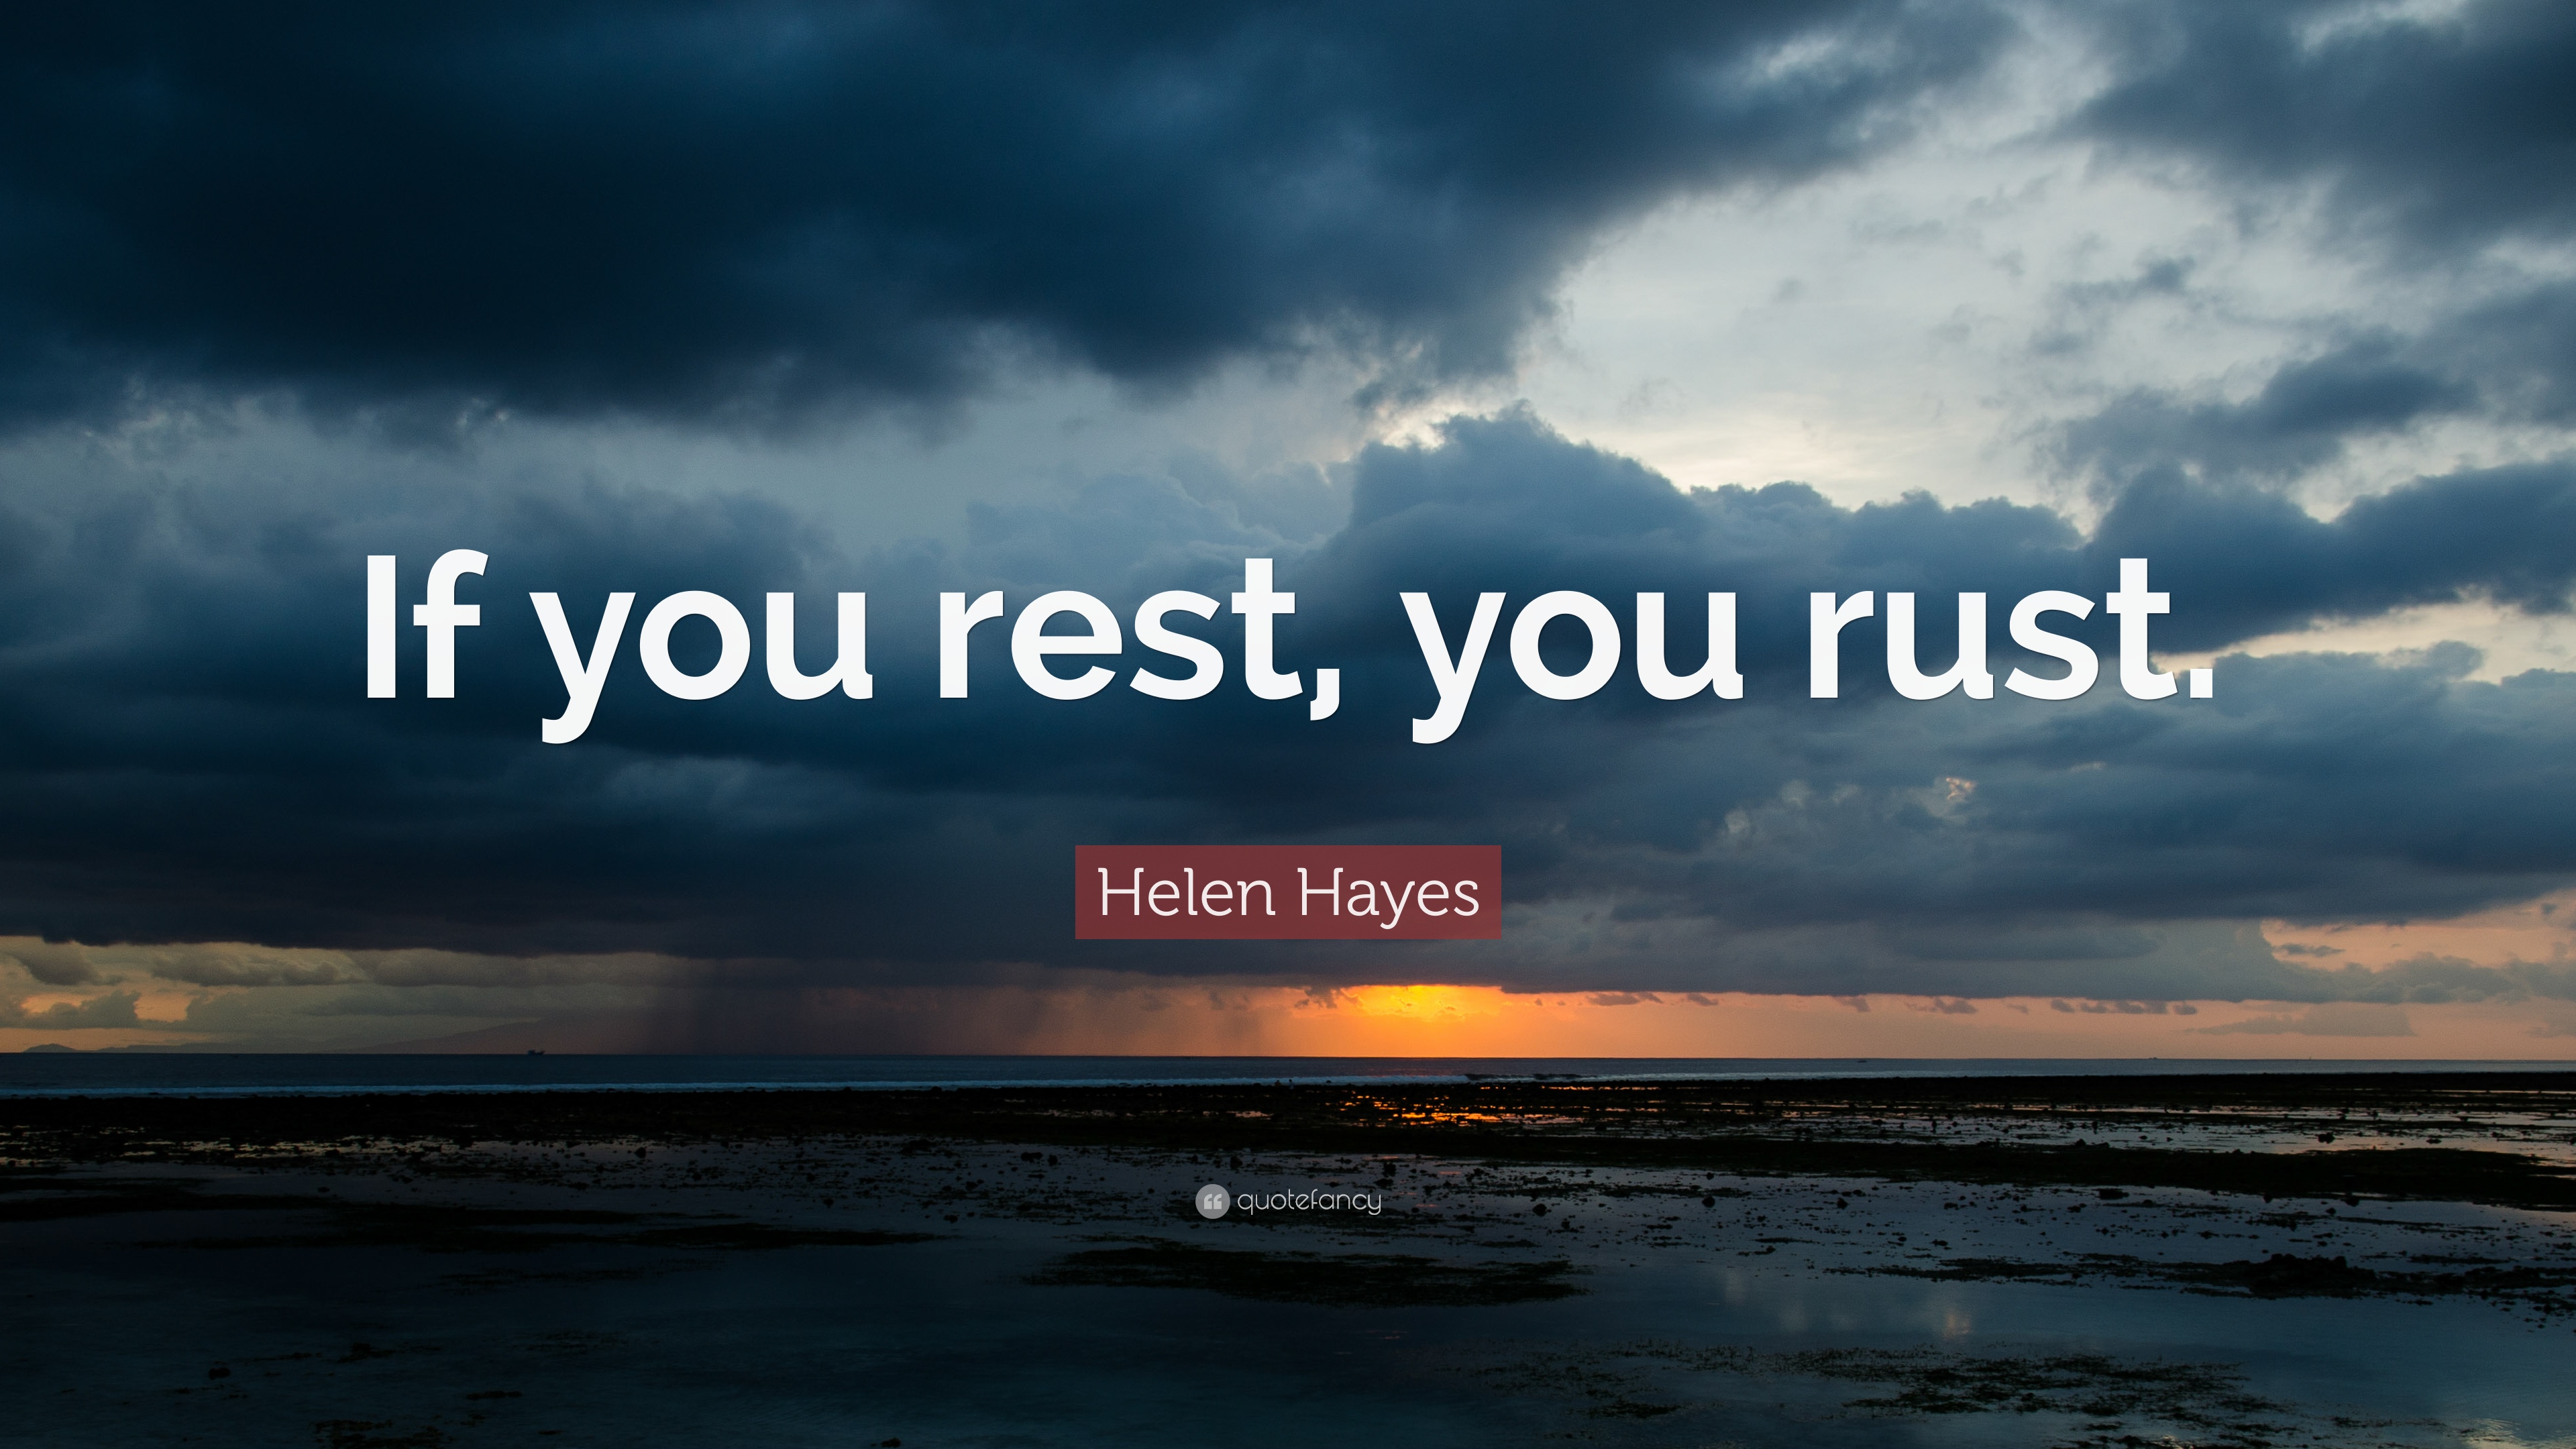 Helen Hayes Quote: “If you rest, you rust.” (12 wallpaper)